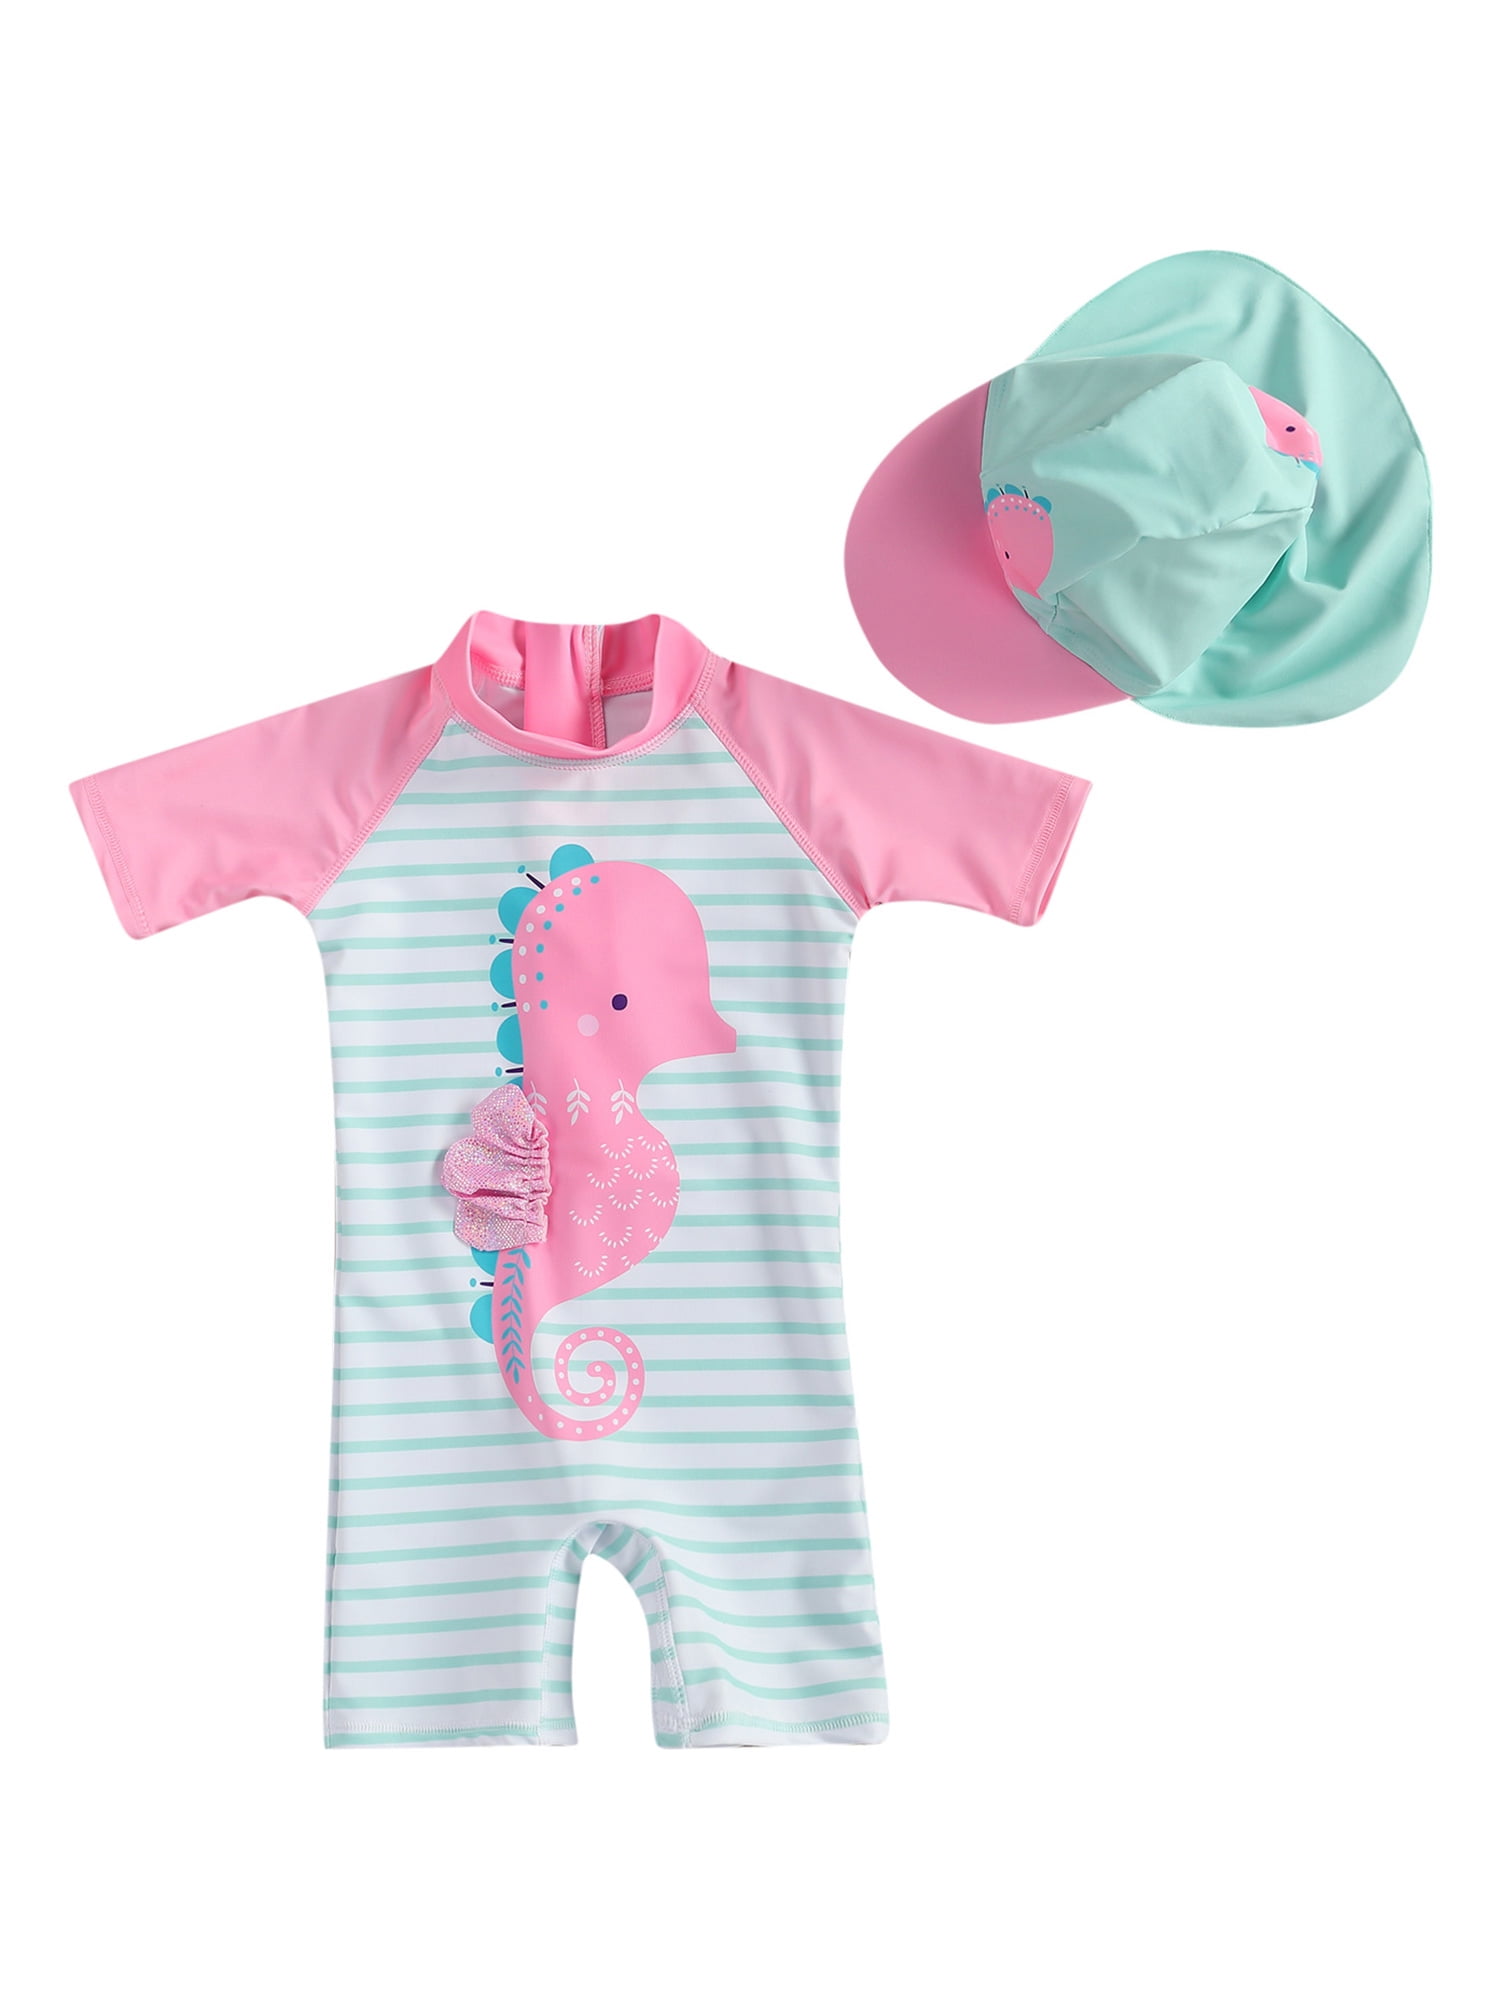 Baby Girl Bathing Suit L/S UPF 50 Sun Protection Come with a Hats 